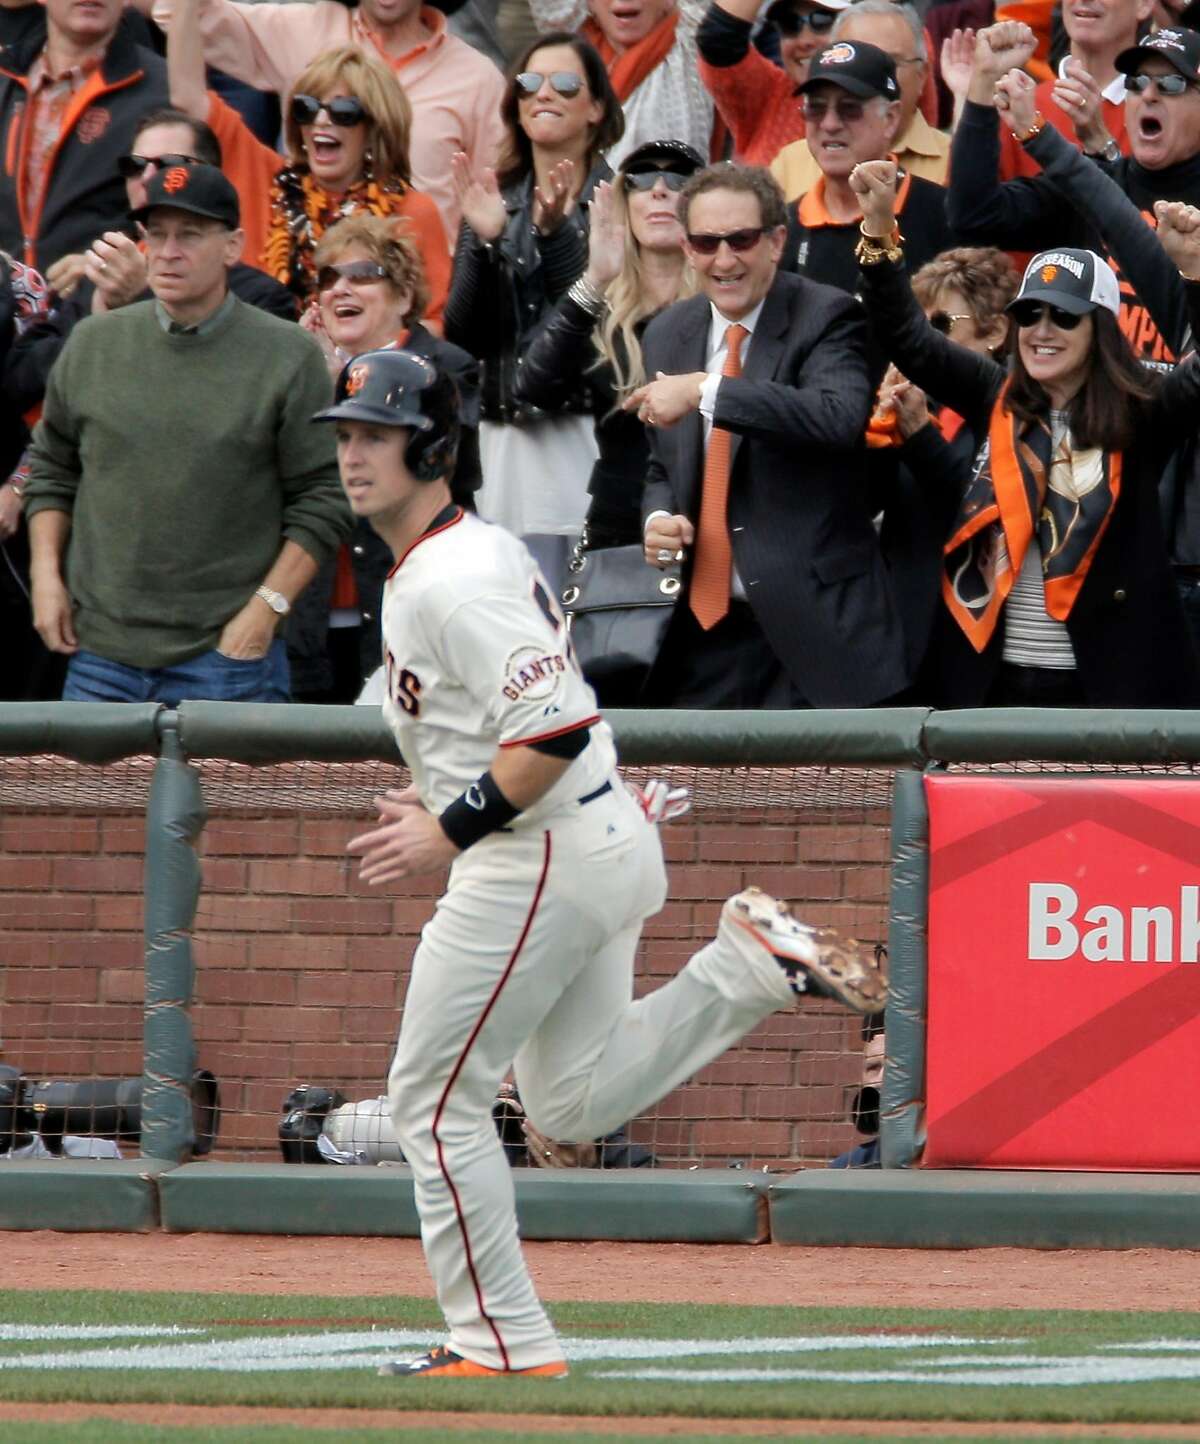 Larry Baer smiles as Giants Buster Posey scored in the first inning on a Hunter Pence double during Game 3 of the NLCS at AT&T Park on Tuesday, Oct. 14, 2014 in San Francisco, Calif.